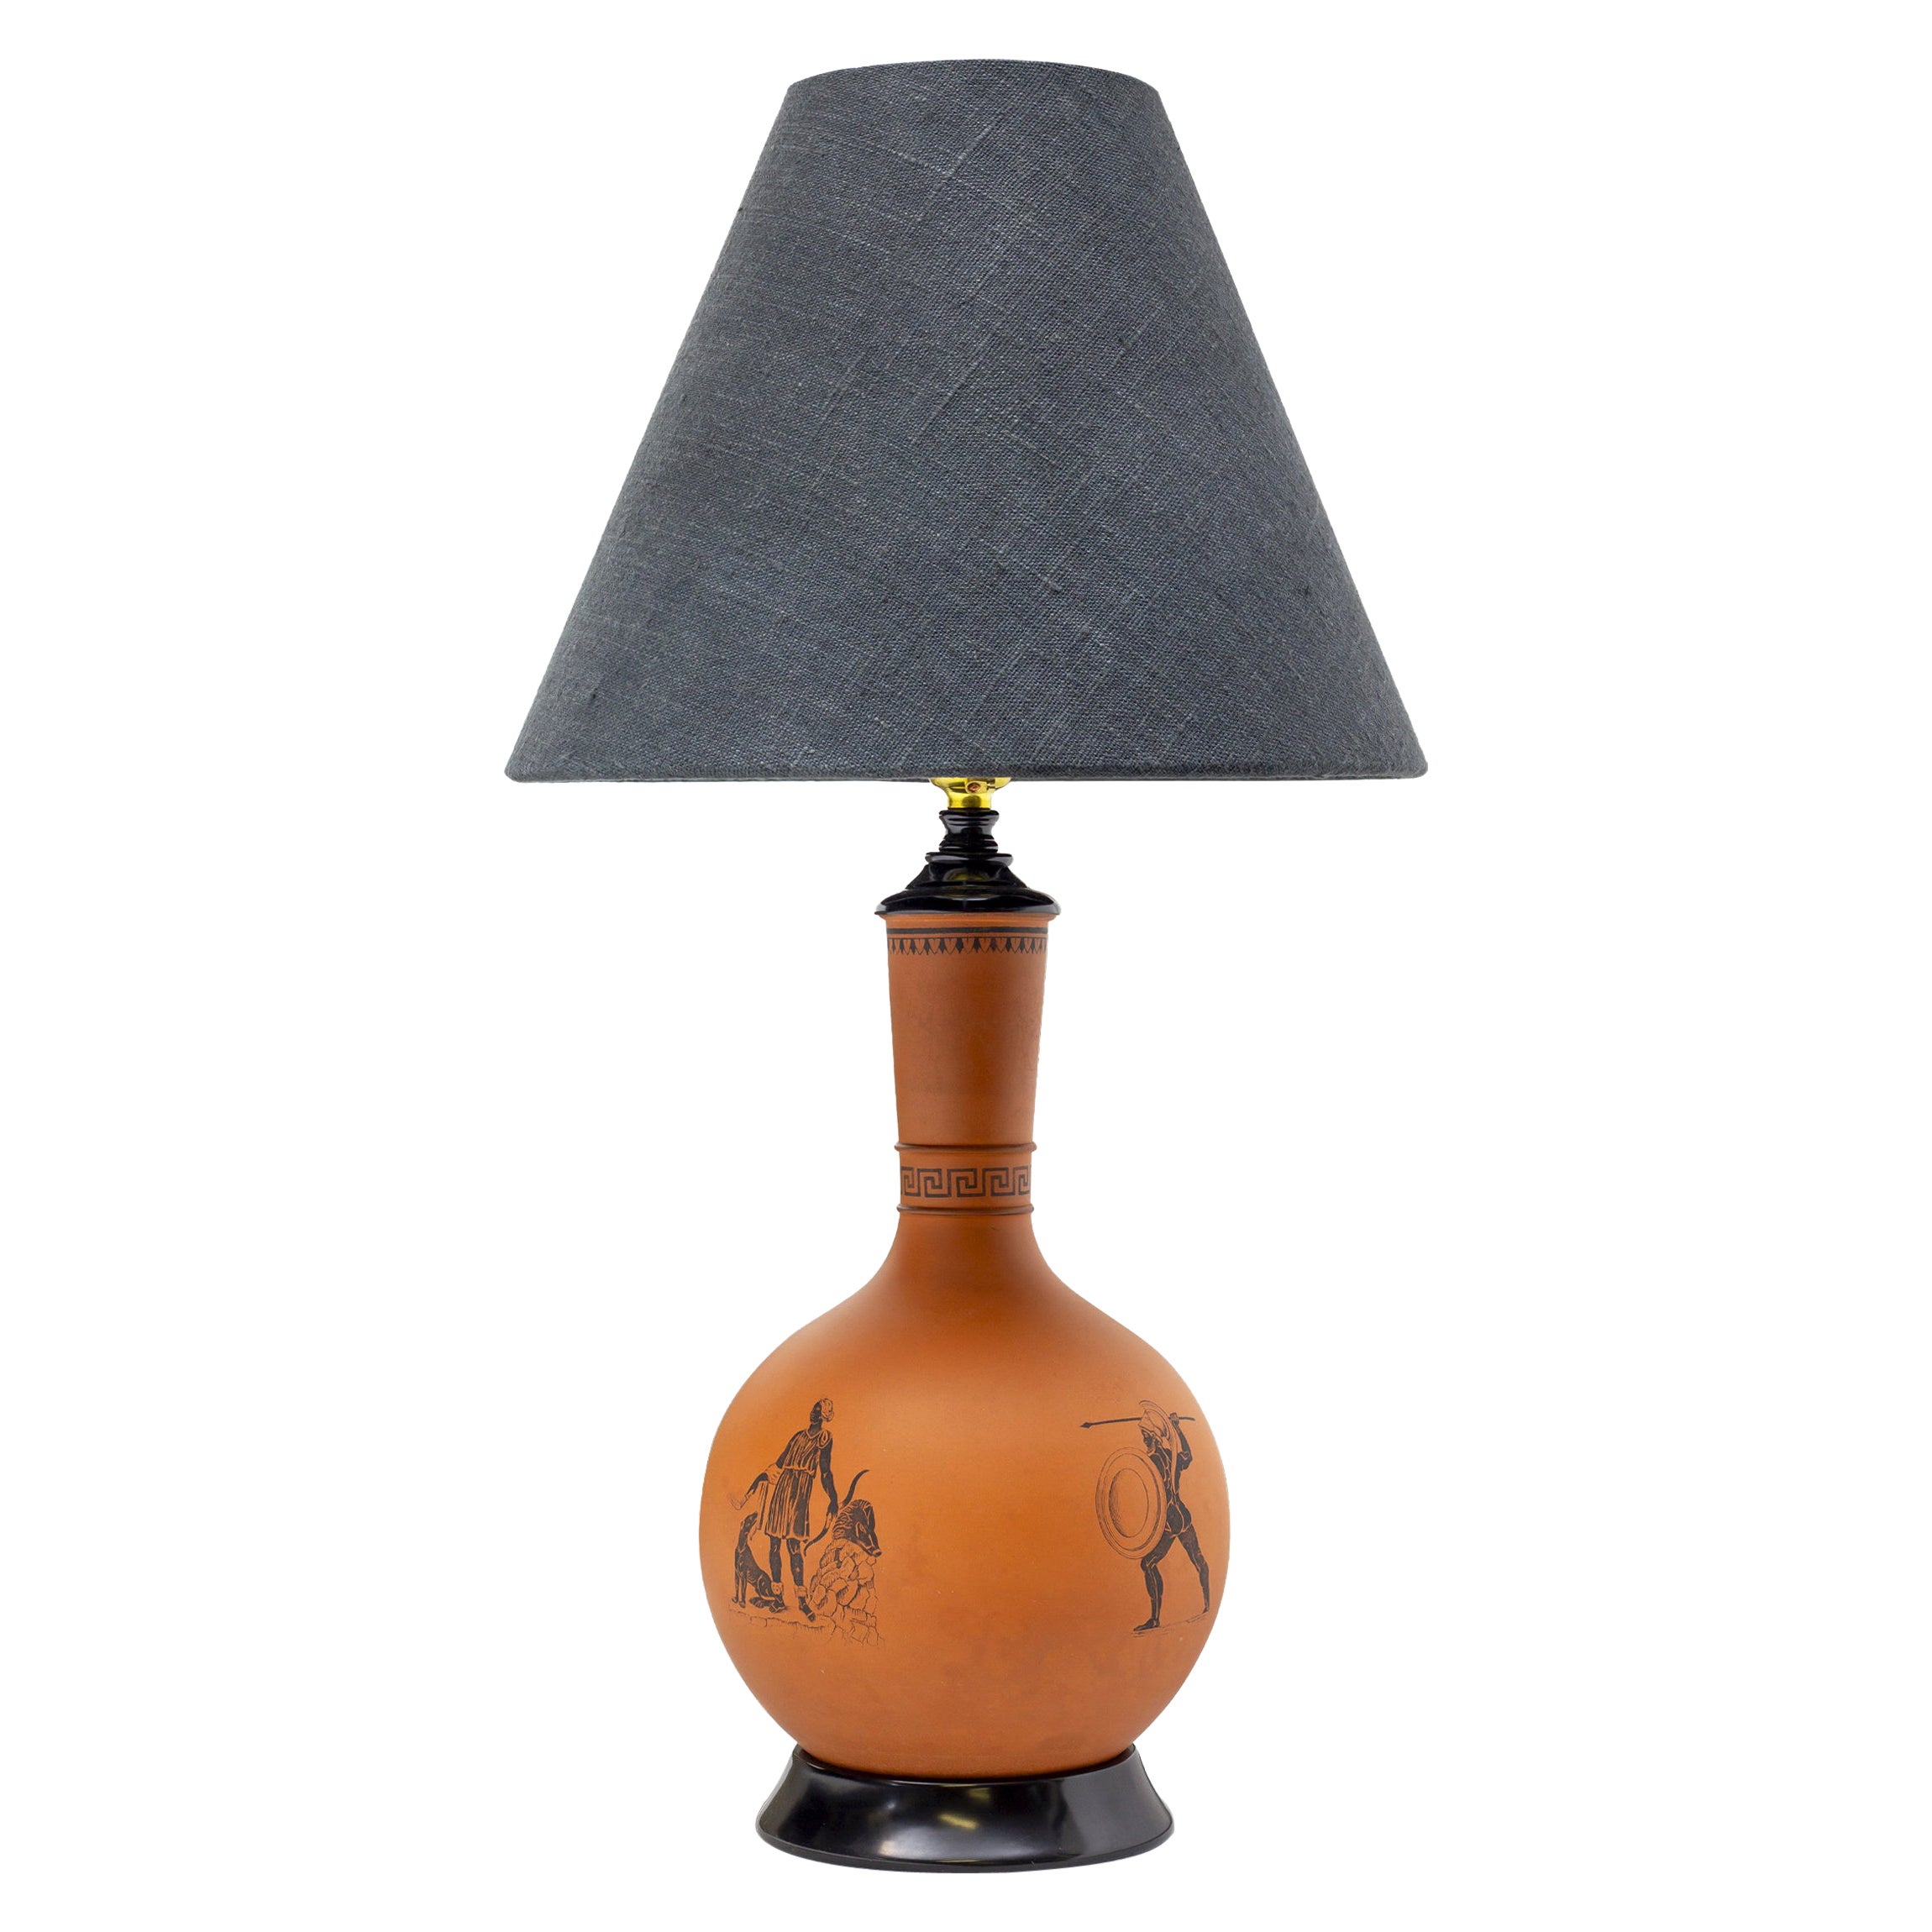 Aesthetic Movement Table Lamp by Christopher Dresser